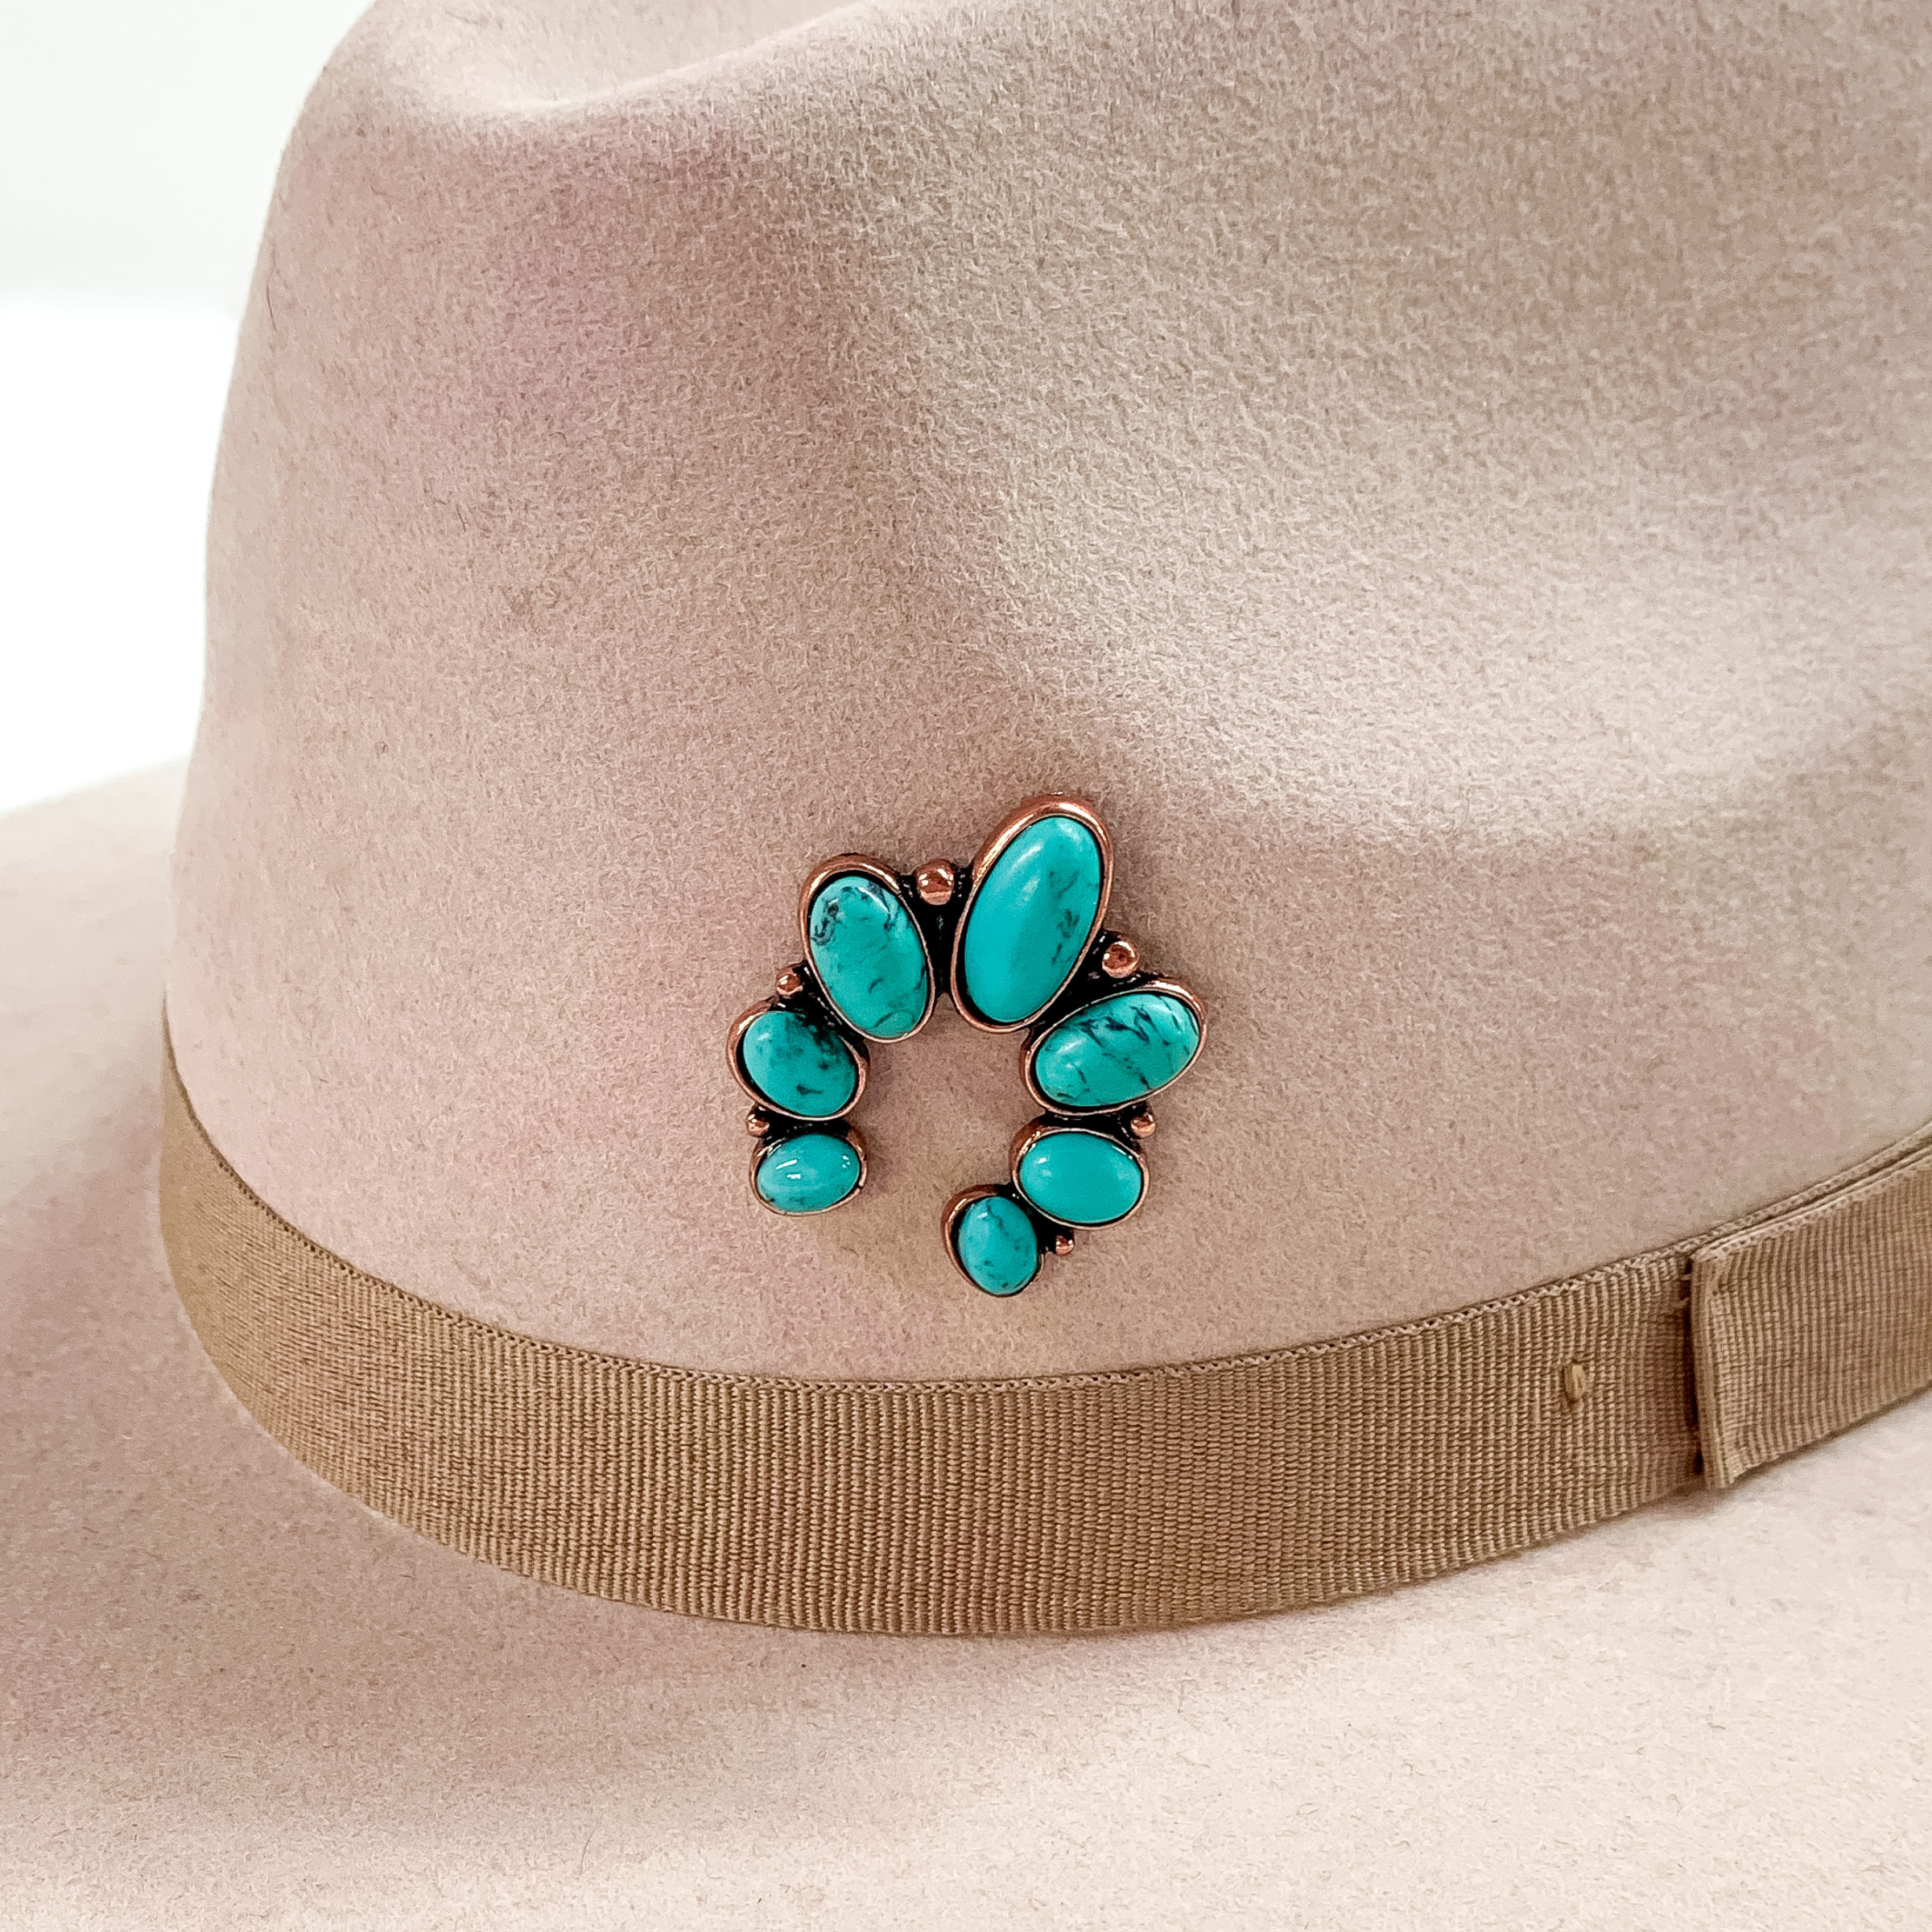 Copper naja hat pin with turquoise stones pictured on a beige colored hat pictured on a white background.